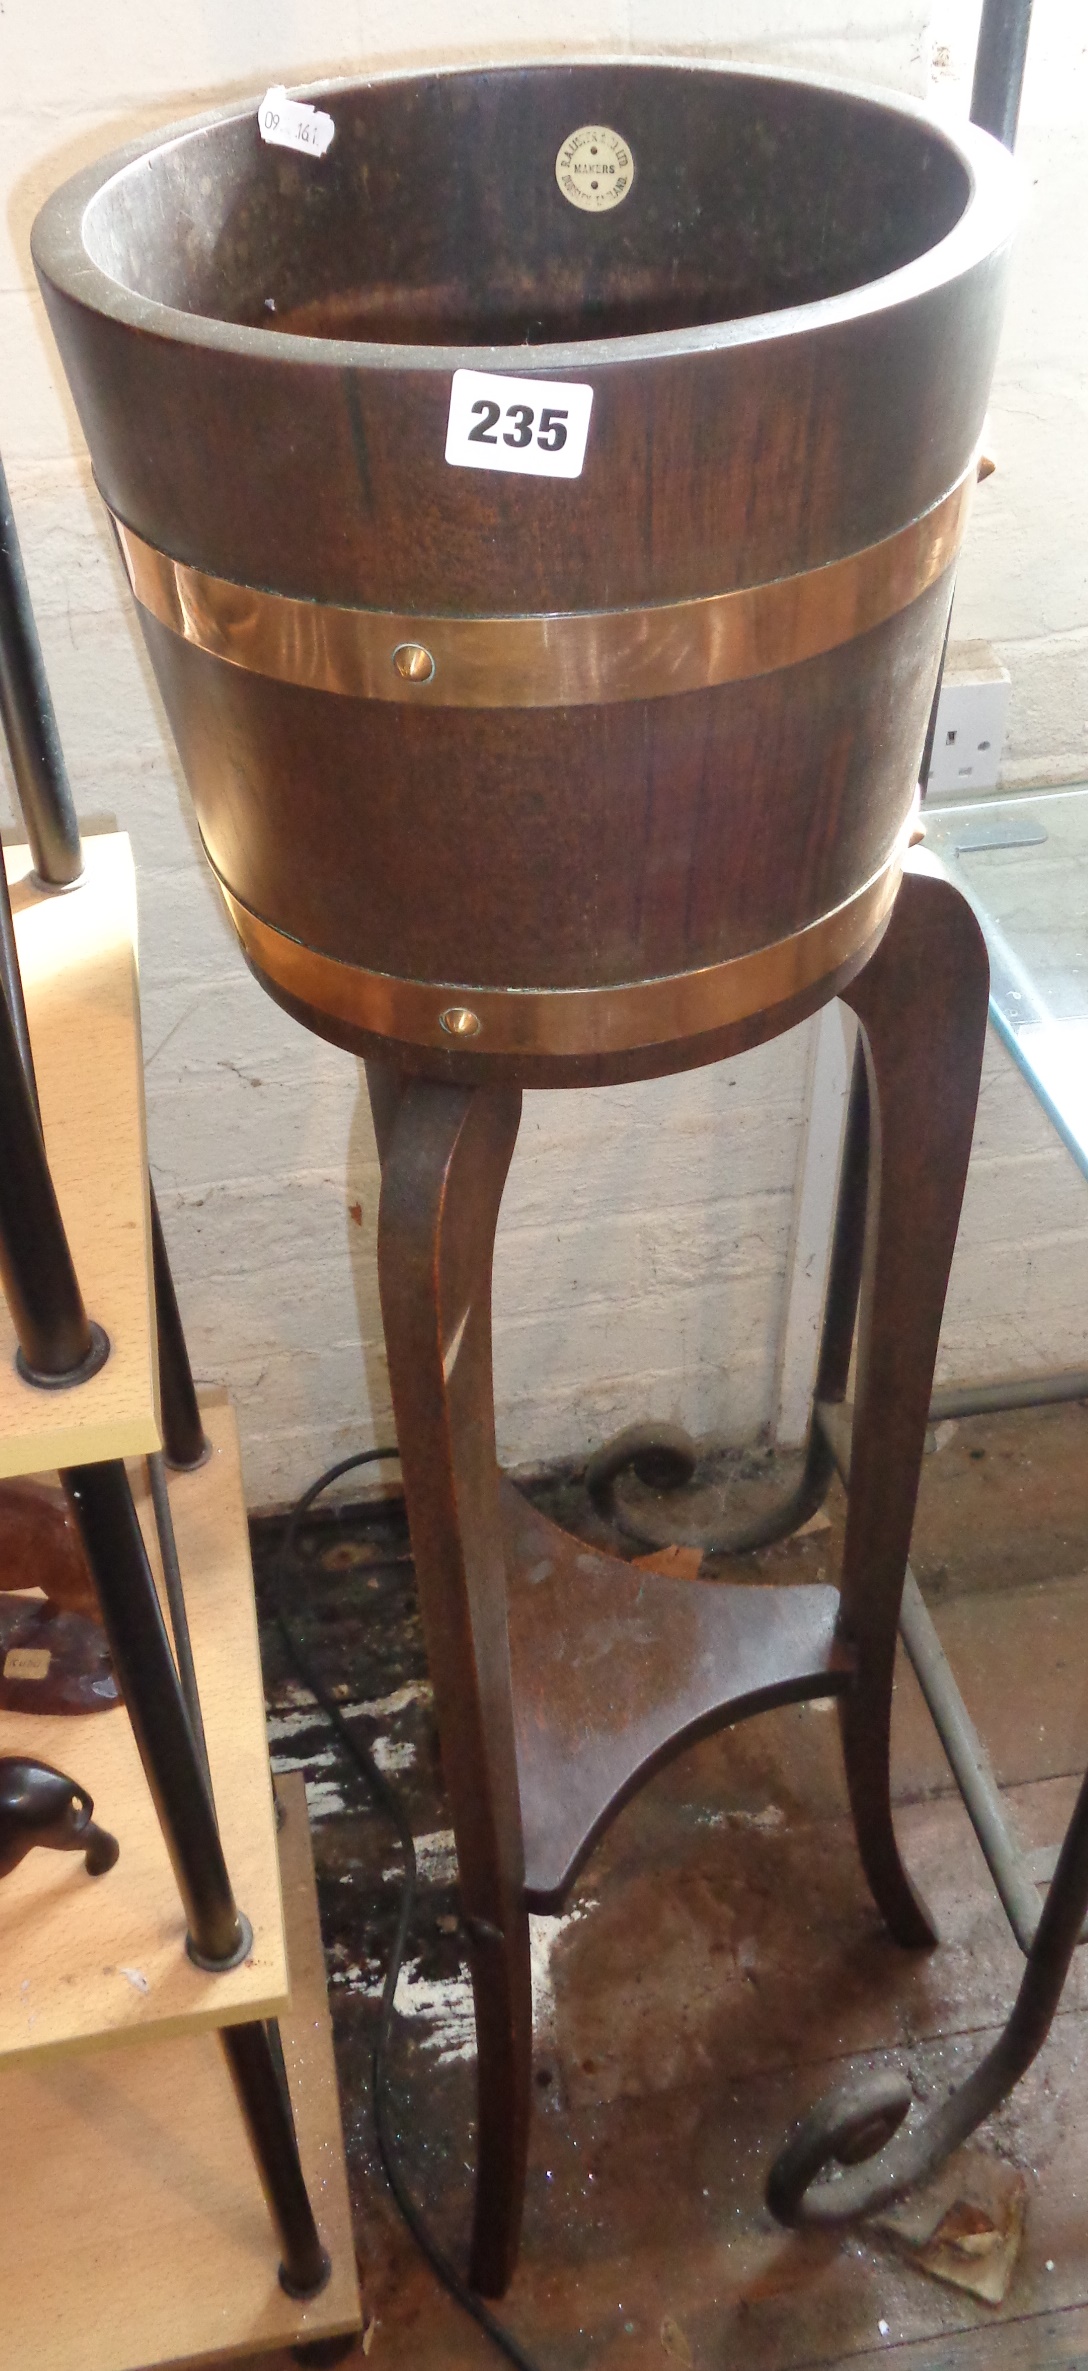 Copper bound oak barrel planter on stand by R. Lister of Dursley